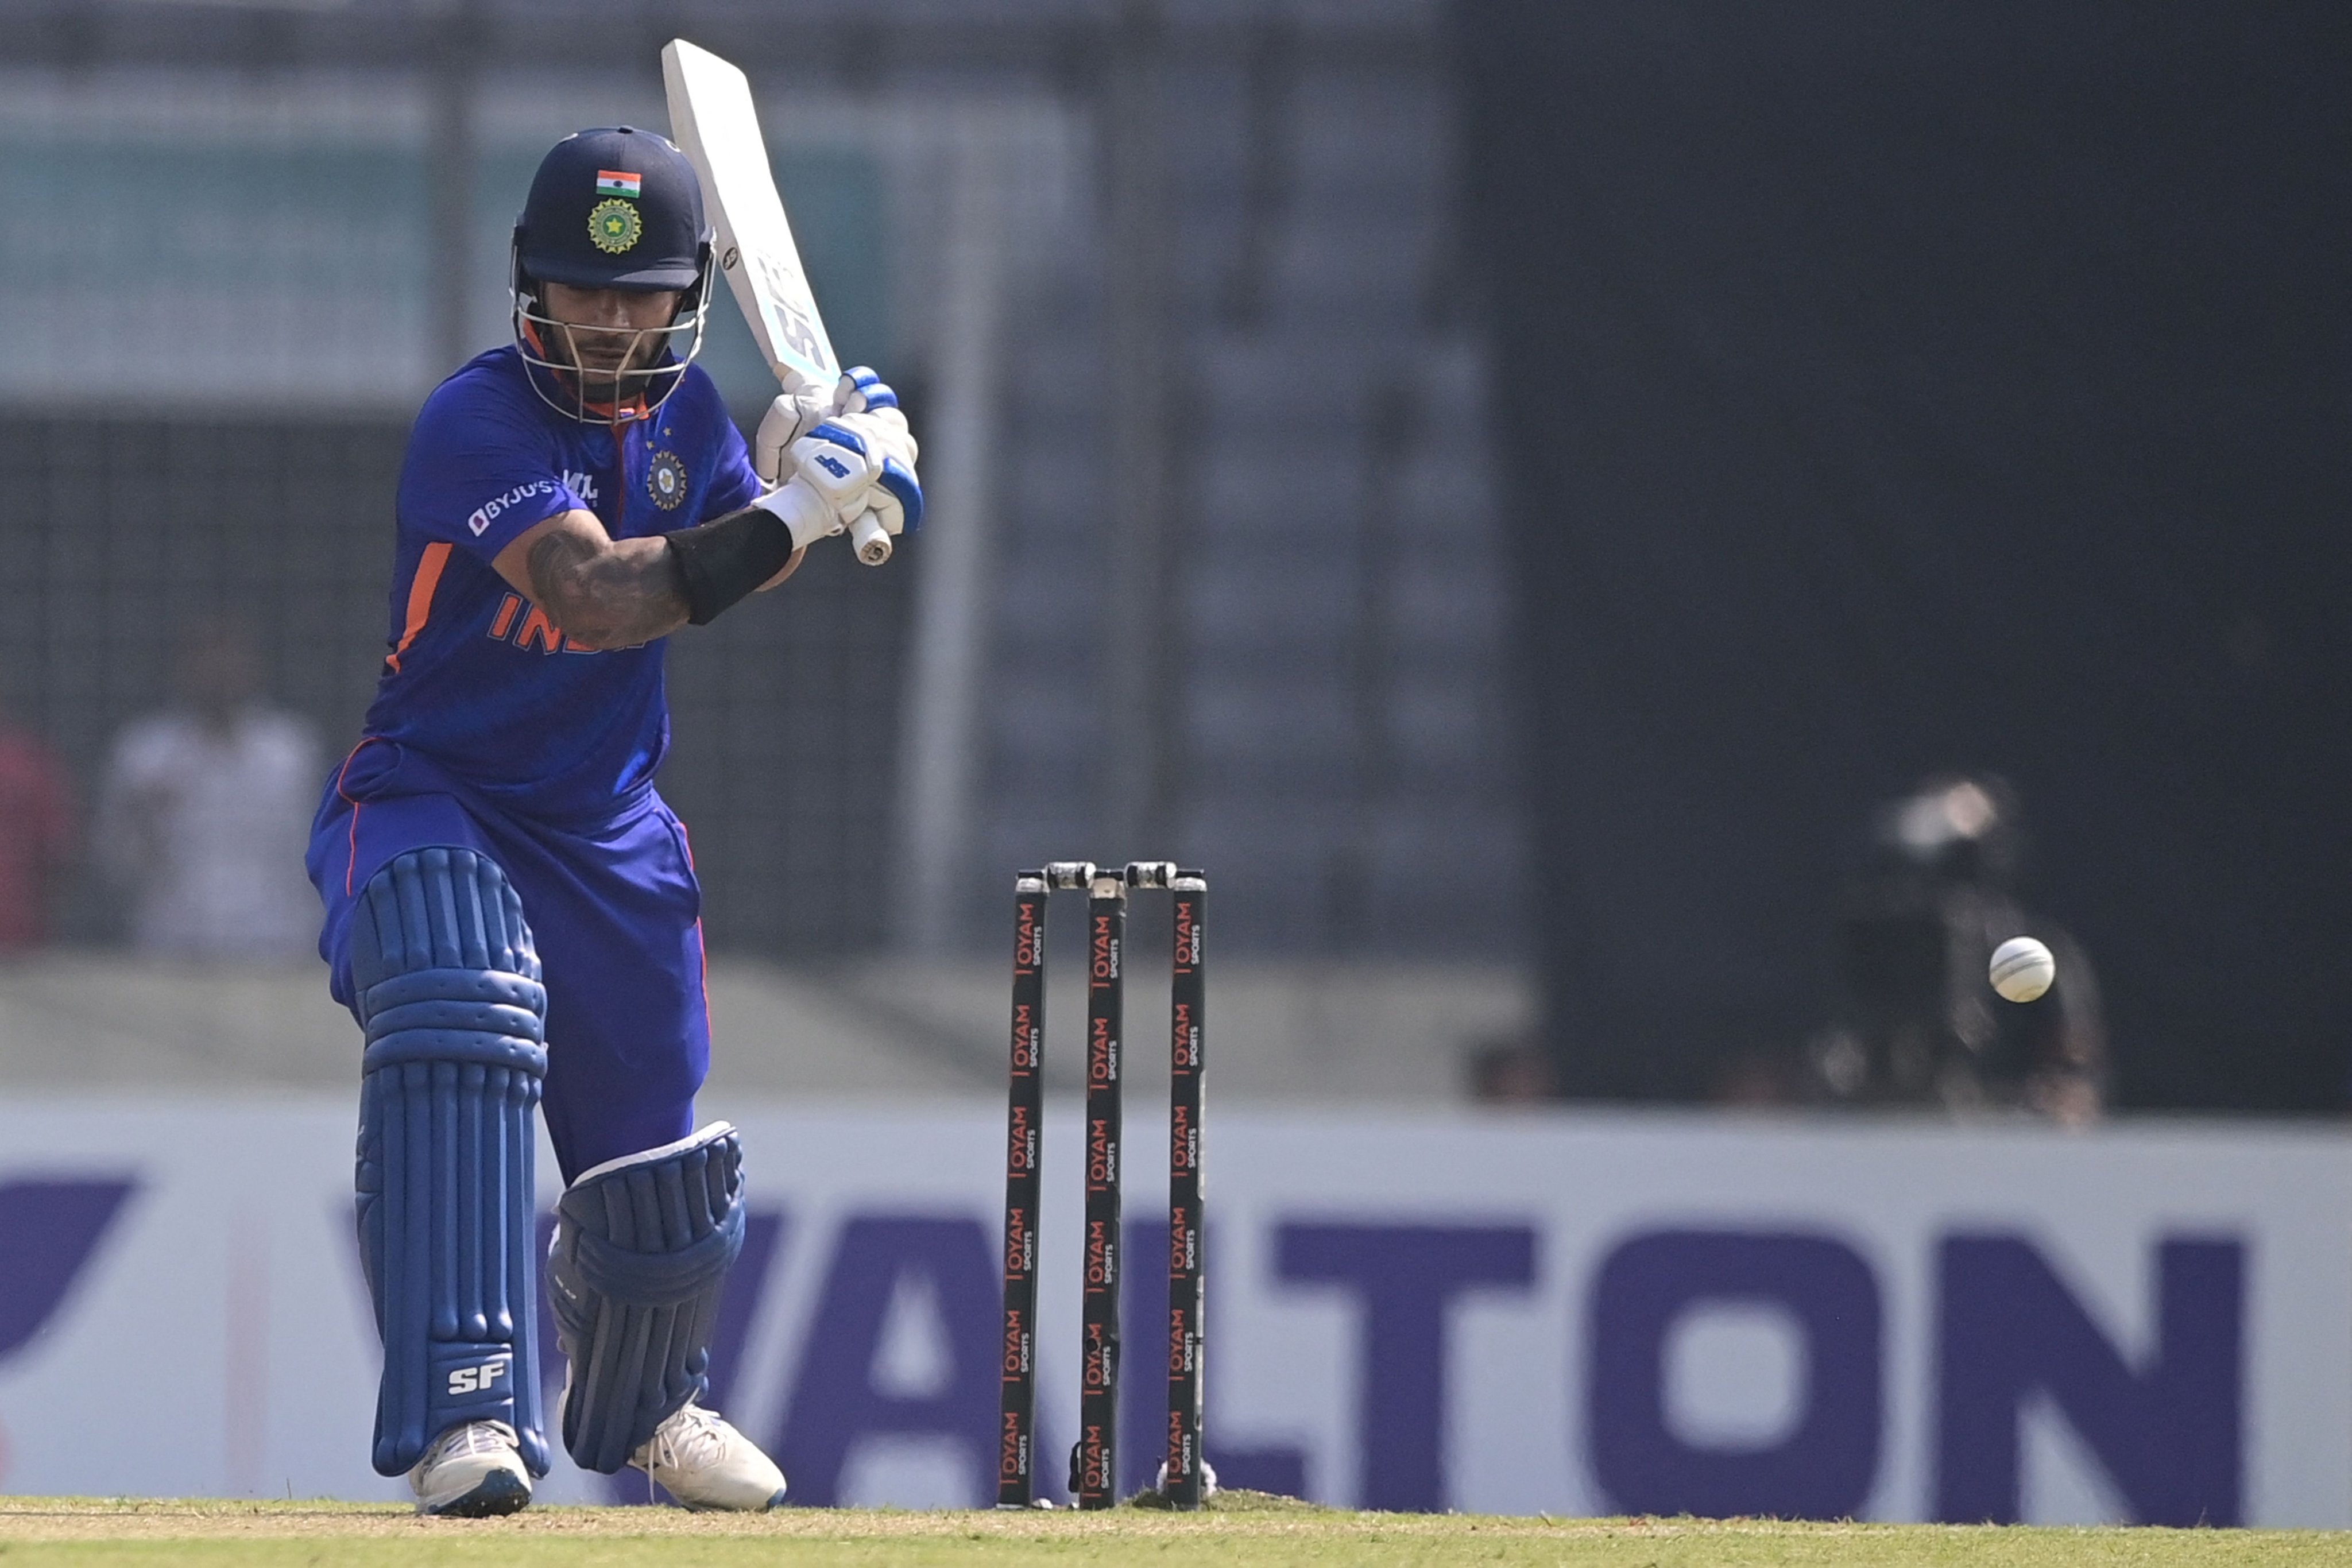 IND vs BAN: Shikhar Dhawan continues rough patch in Dhaka, Ishan Kishan likely to claim keeper's spot in 2nd ODI, Check OUT, India vs Bangladesh LIVE